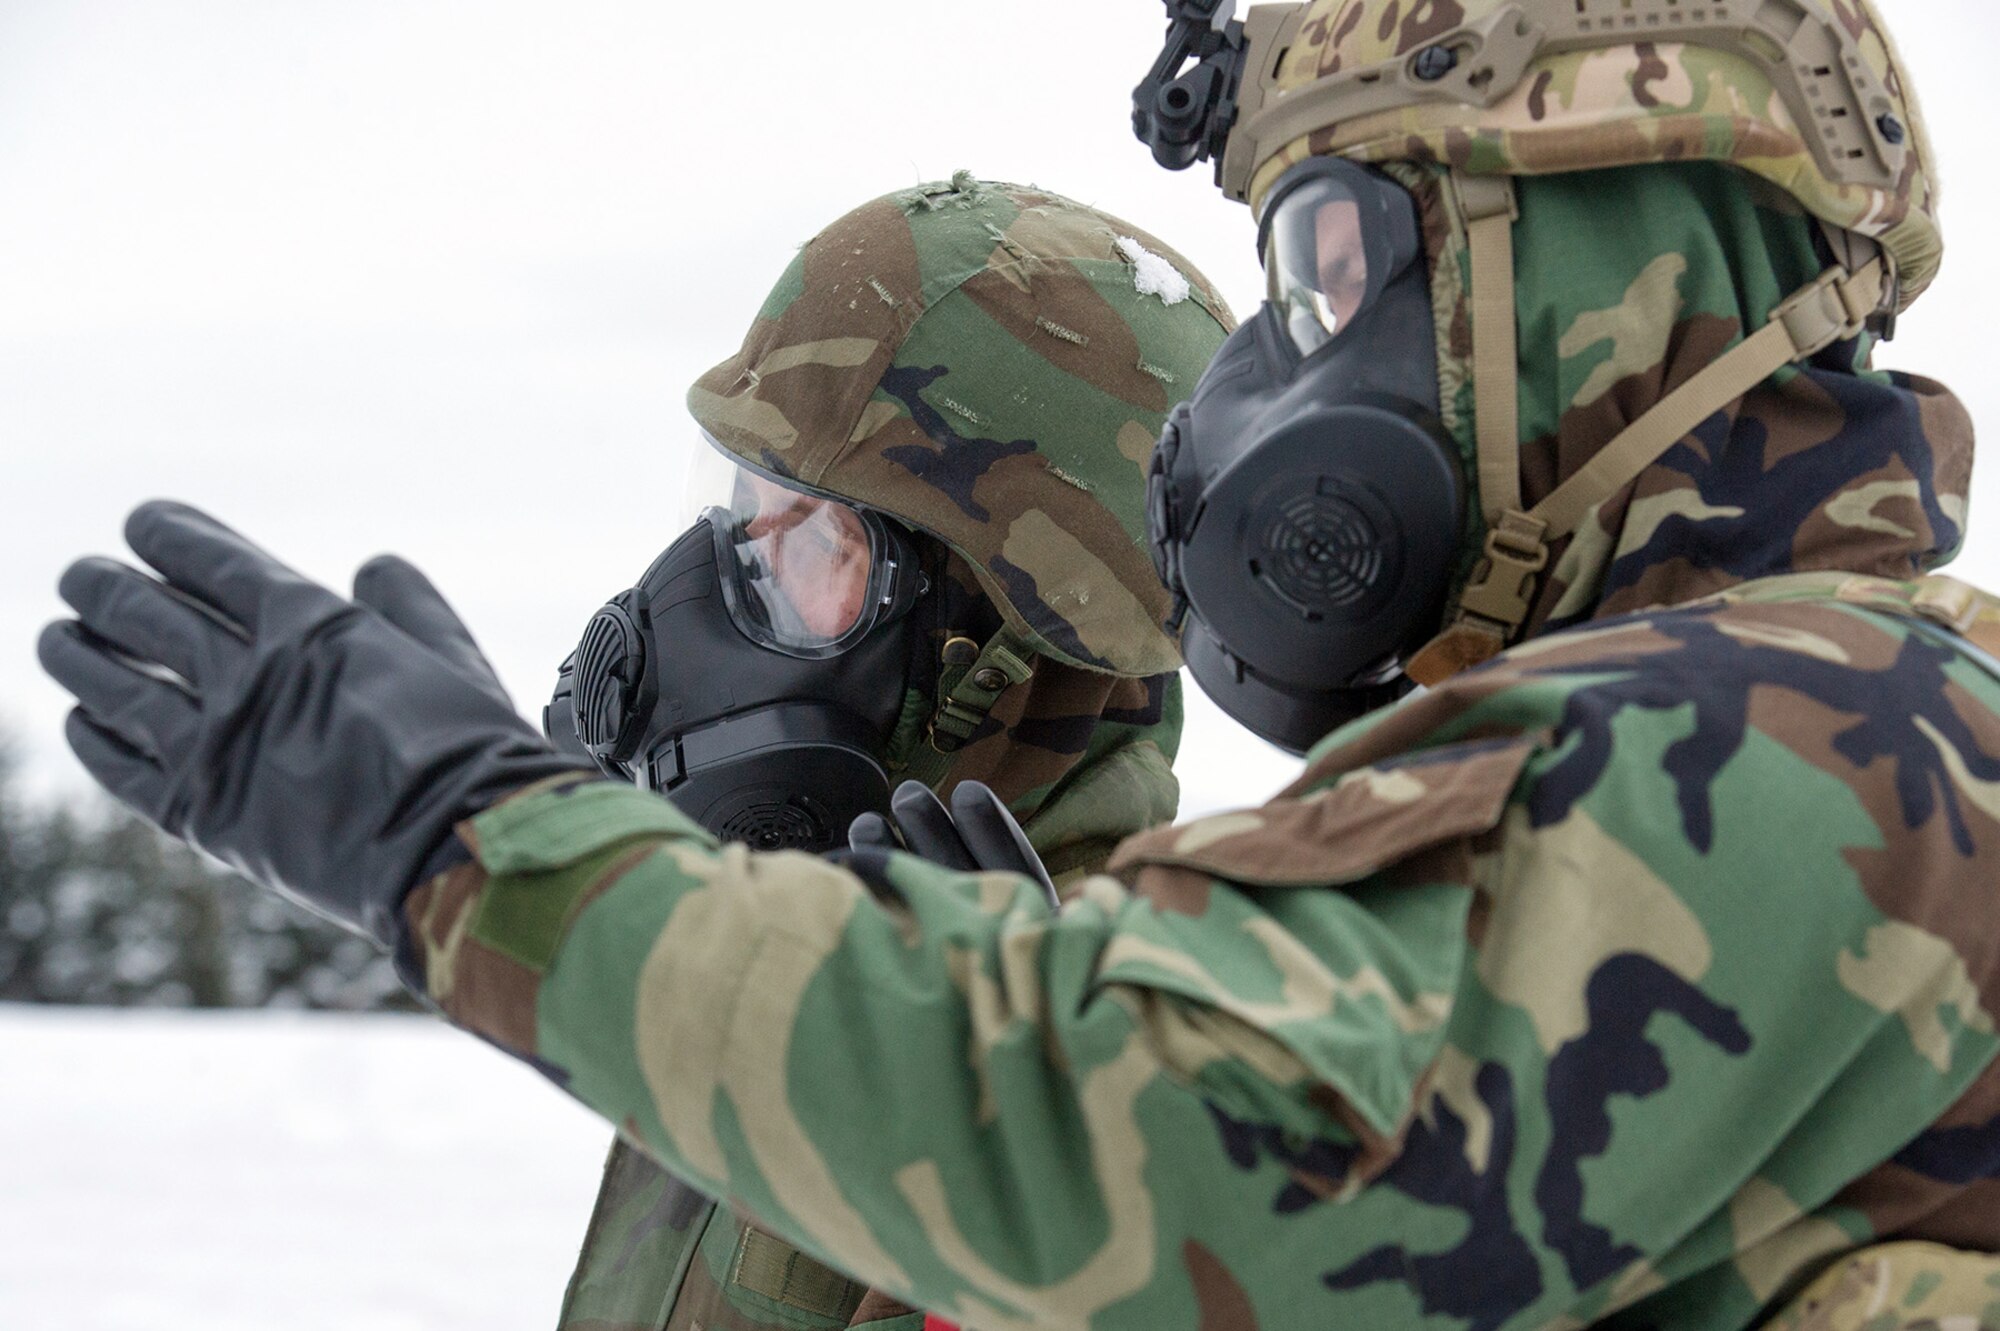 Airmen assigned to the 673d Civil Engineer Squadron, Explosives Ordinance Disposal Flight, observe preperations for a live-fire demolitions exercise in Mission Oriented Protective Posture 4 on Joint Base Elmendorf-Richardson, Alaska, Feb.14, 2018.  The Airmen were conducting EOD training in a simulated chemical weapons contaminated environment.